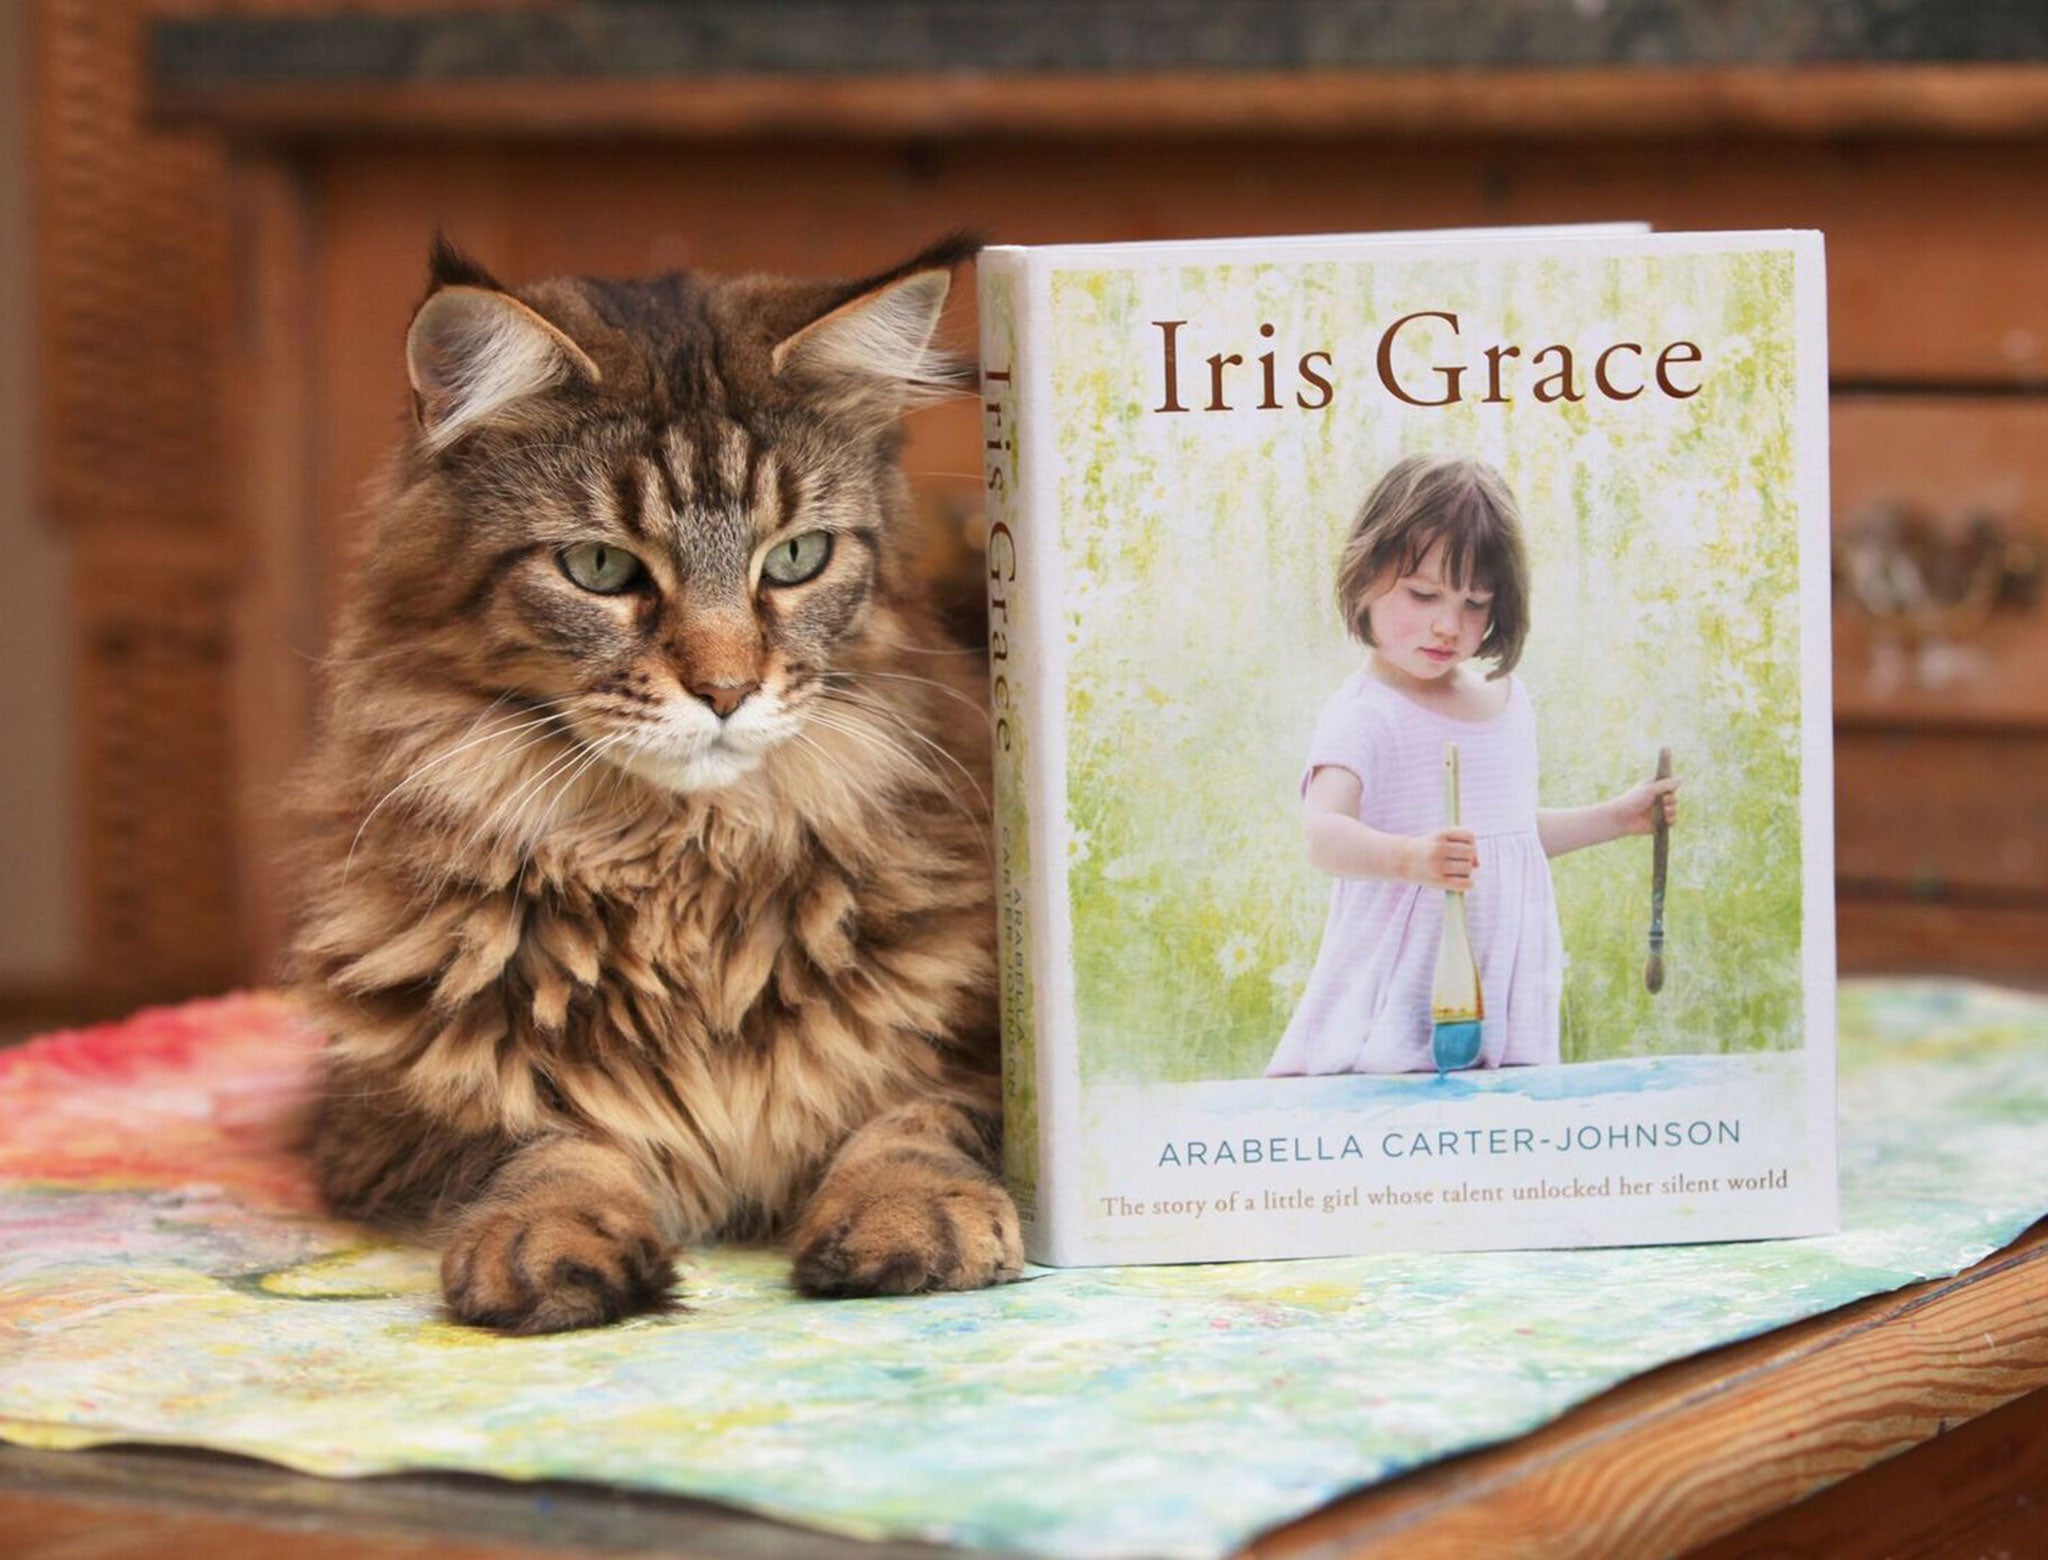 Thula the cat poses next to new book Iris Grace by Arabella Carter-Johnson